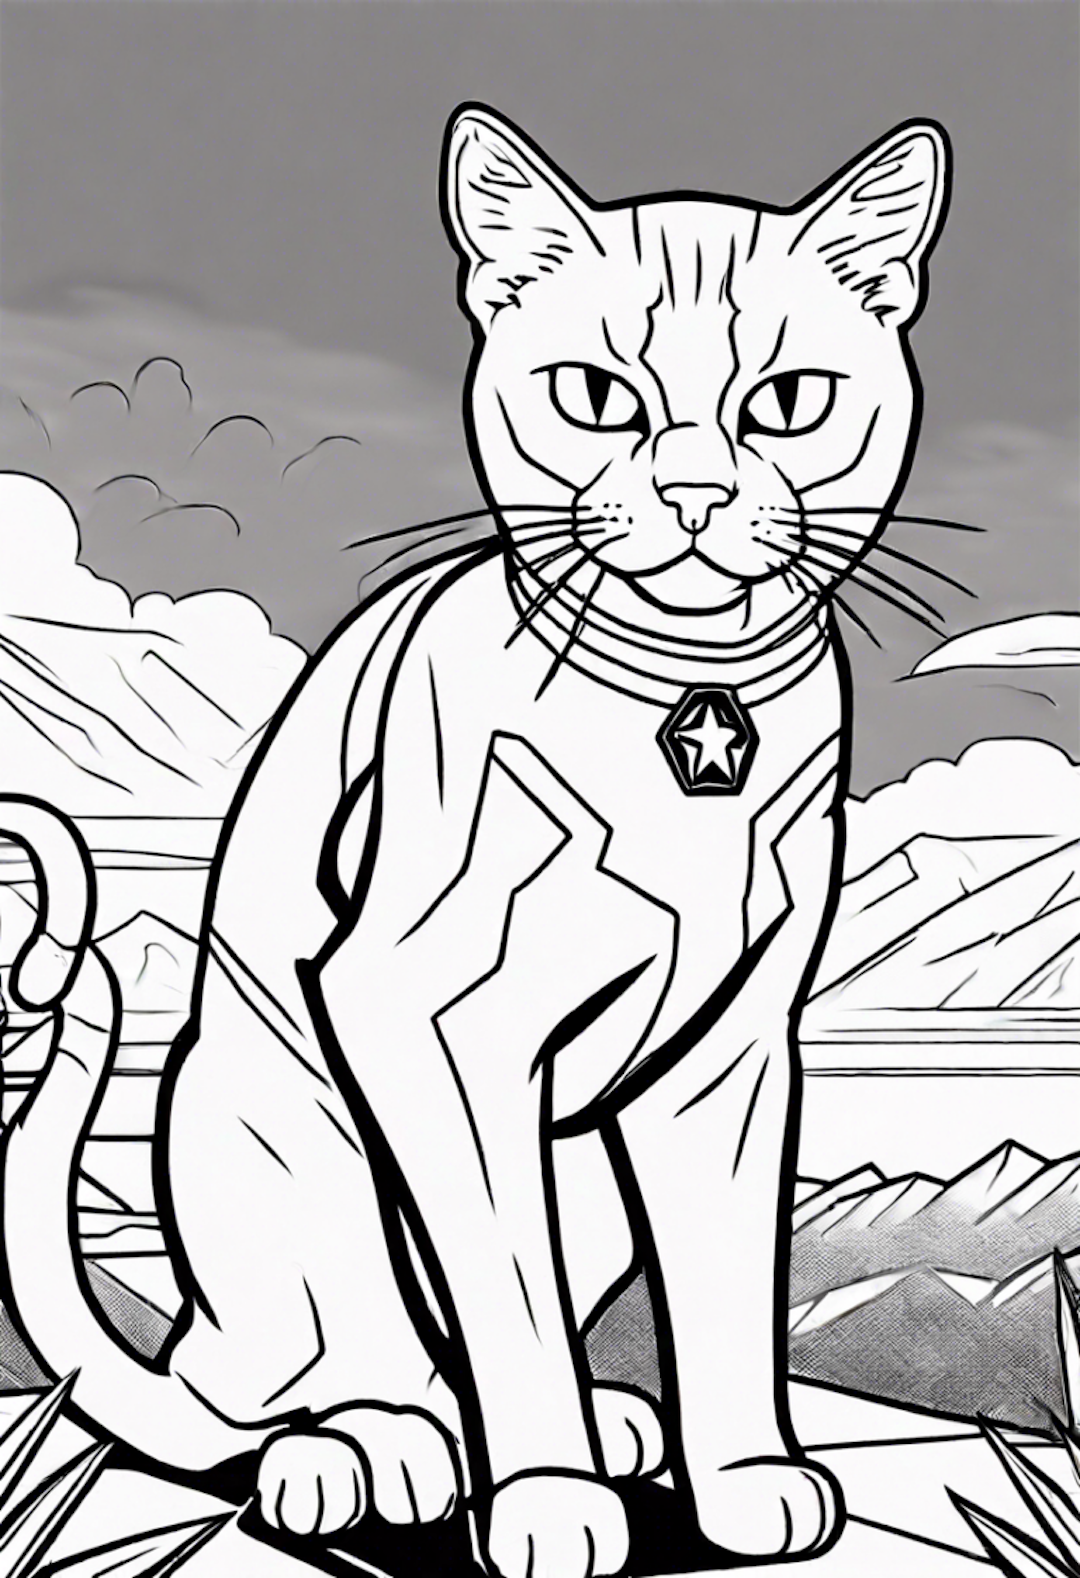 Superhero Cat Marvel Coloring Page coloring pages